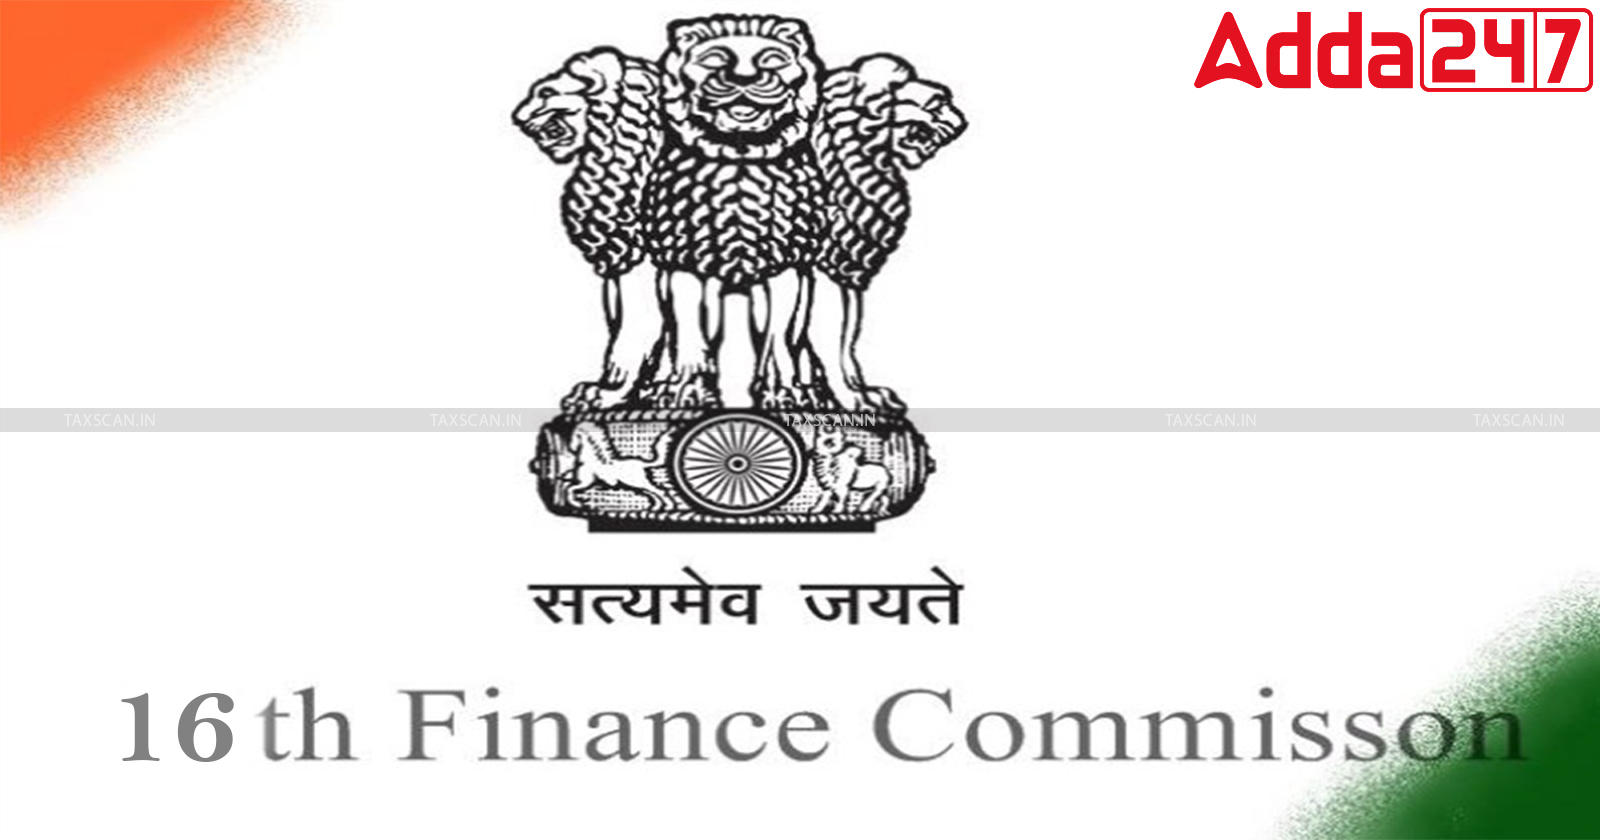 Government Appoints Four key Members of the Sixteenth Finance Commission